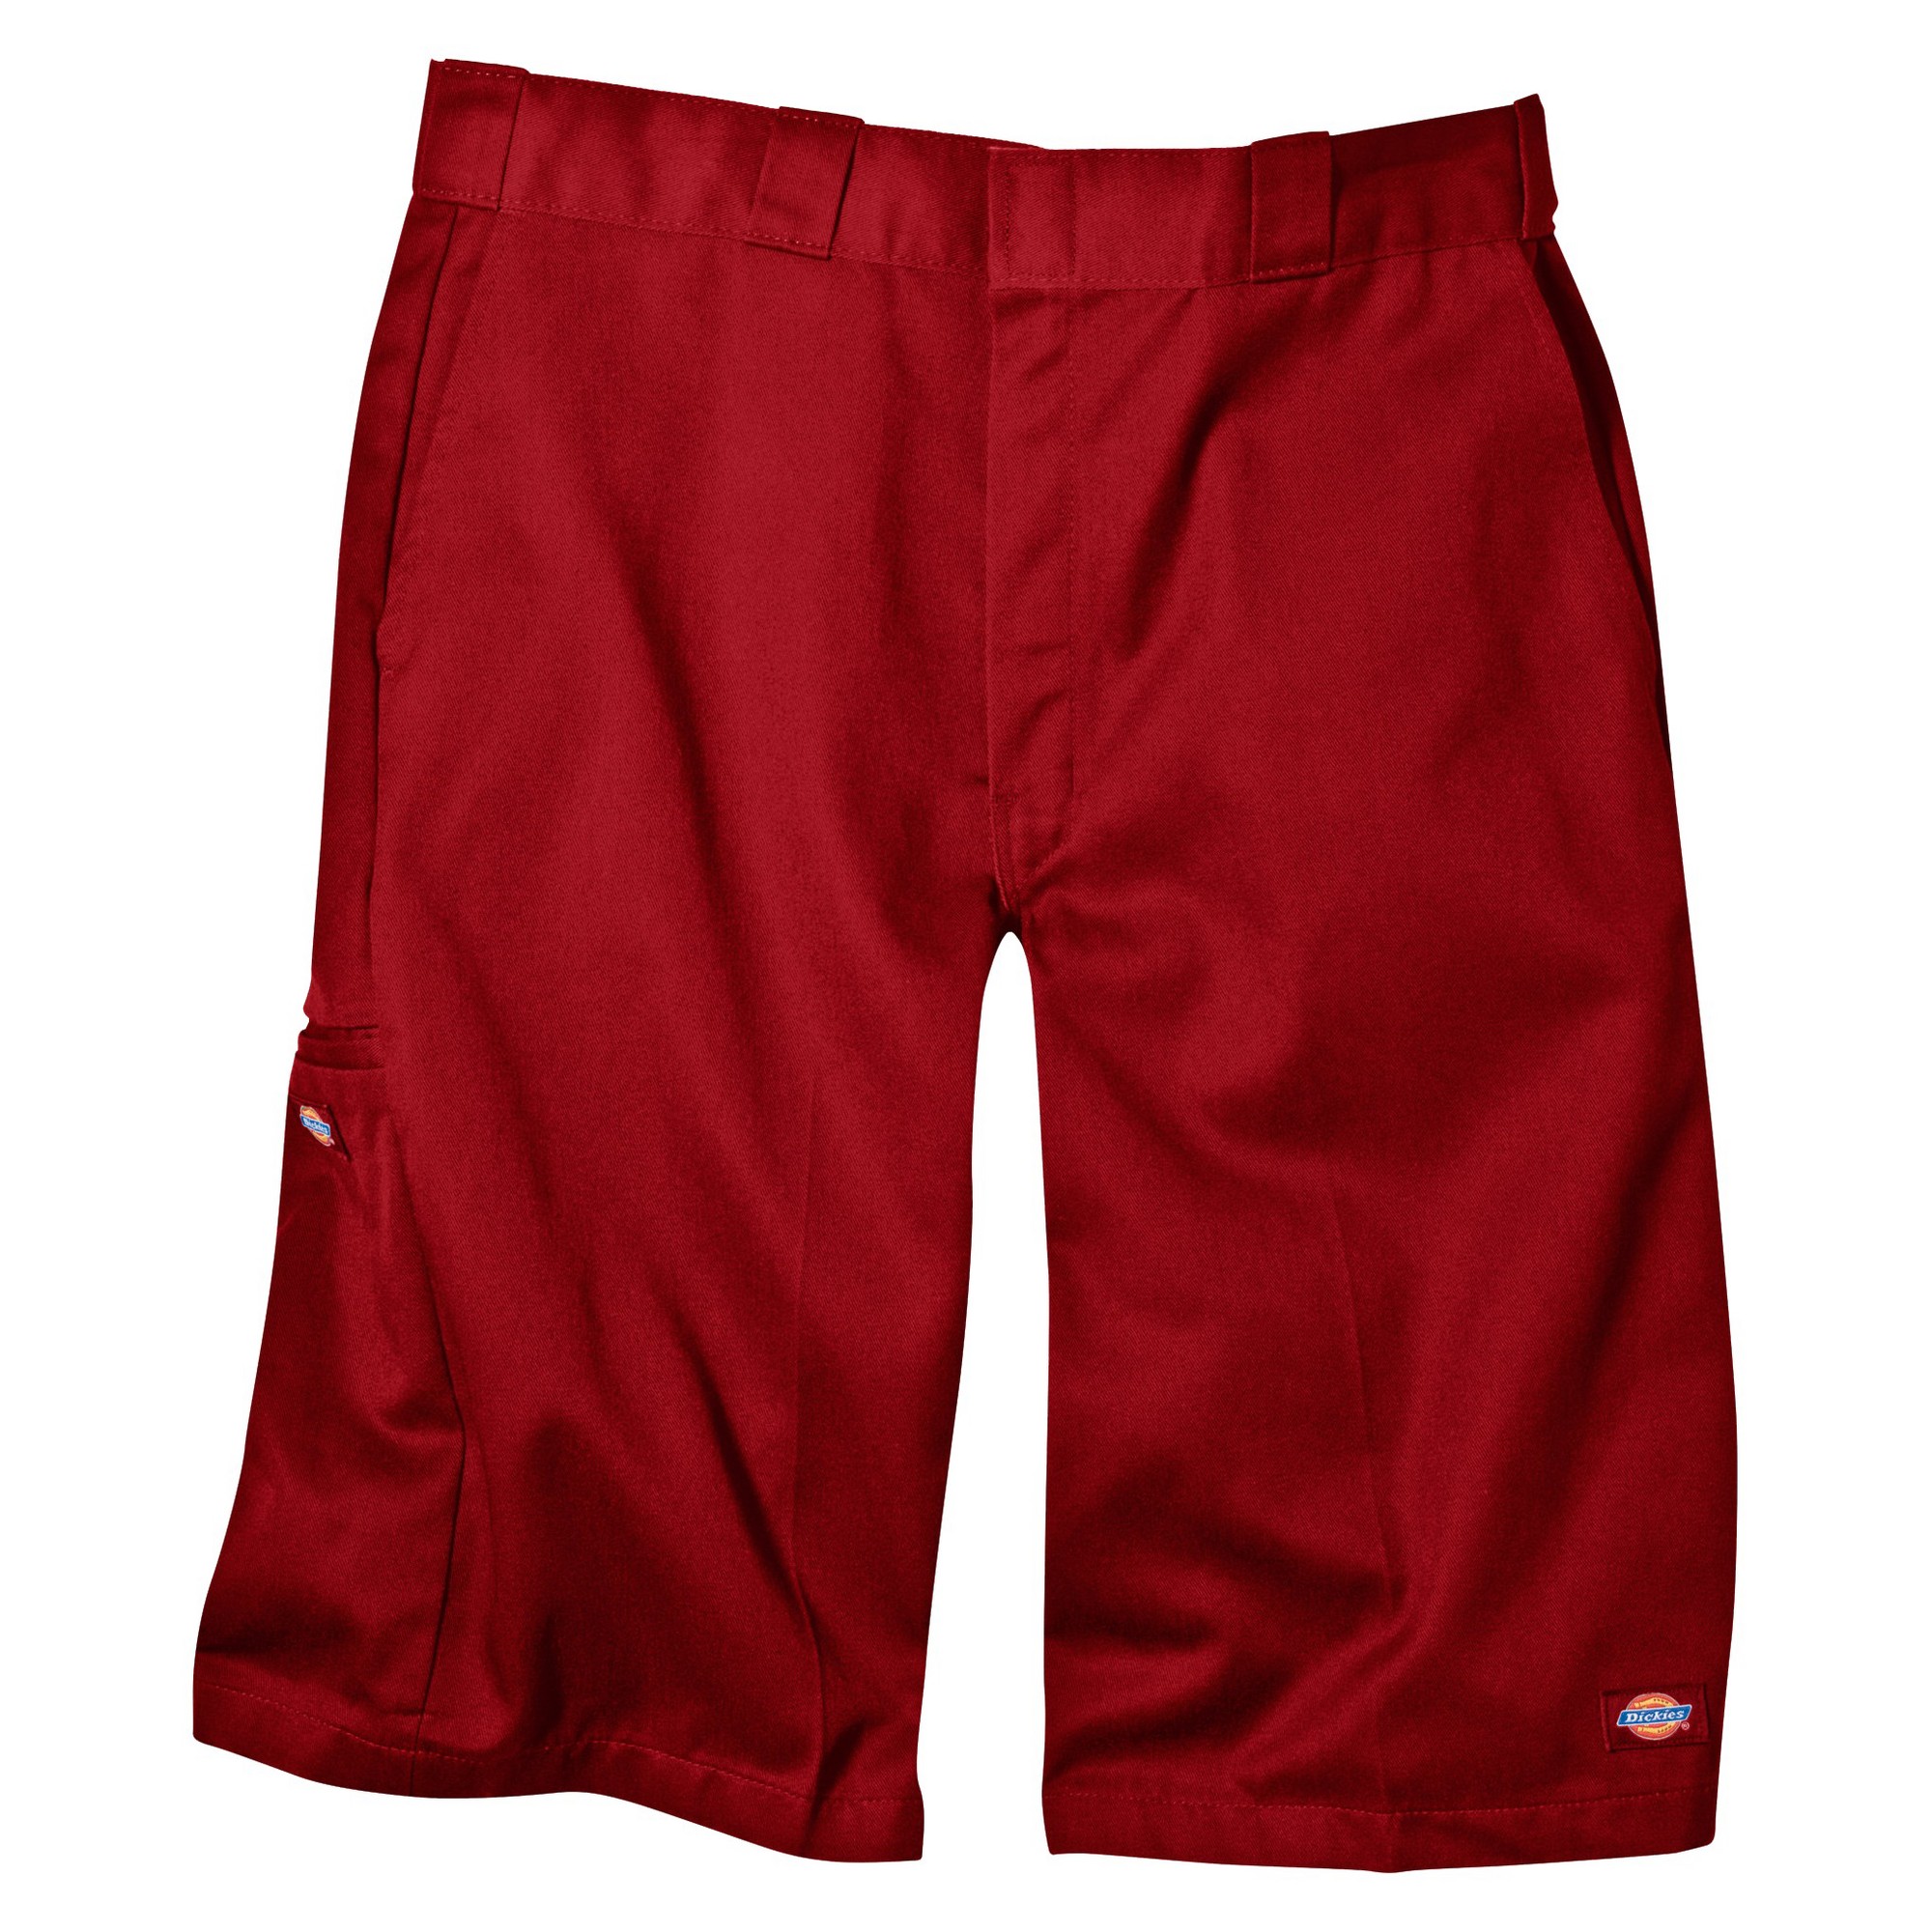 'Dickies Men's Loose Fit Twill 13'' Multi-Pocket Work Shorts- English Red 31'